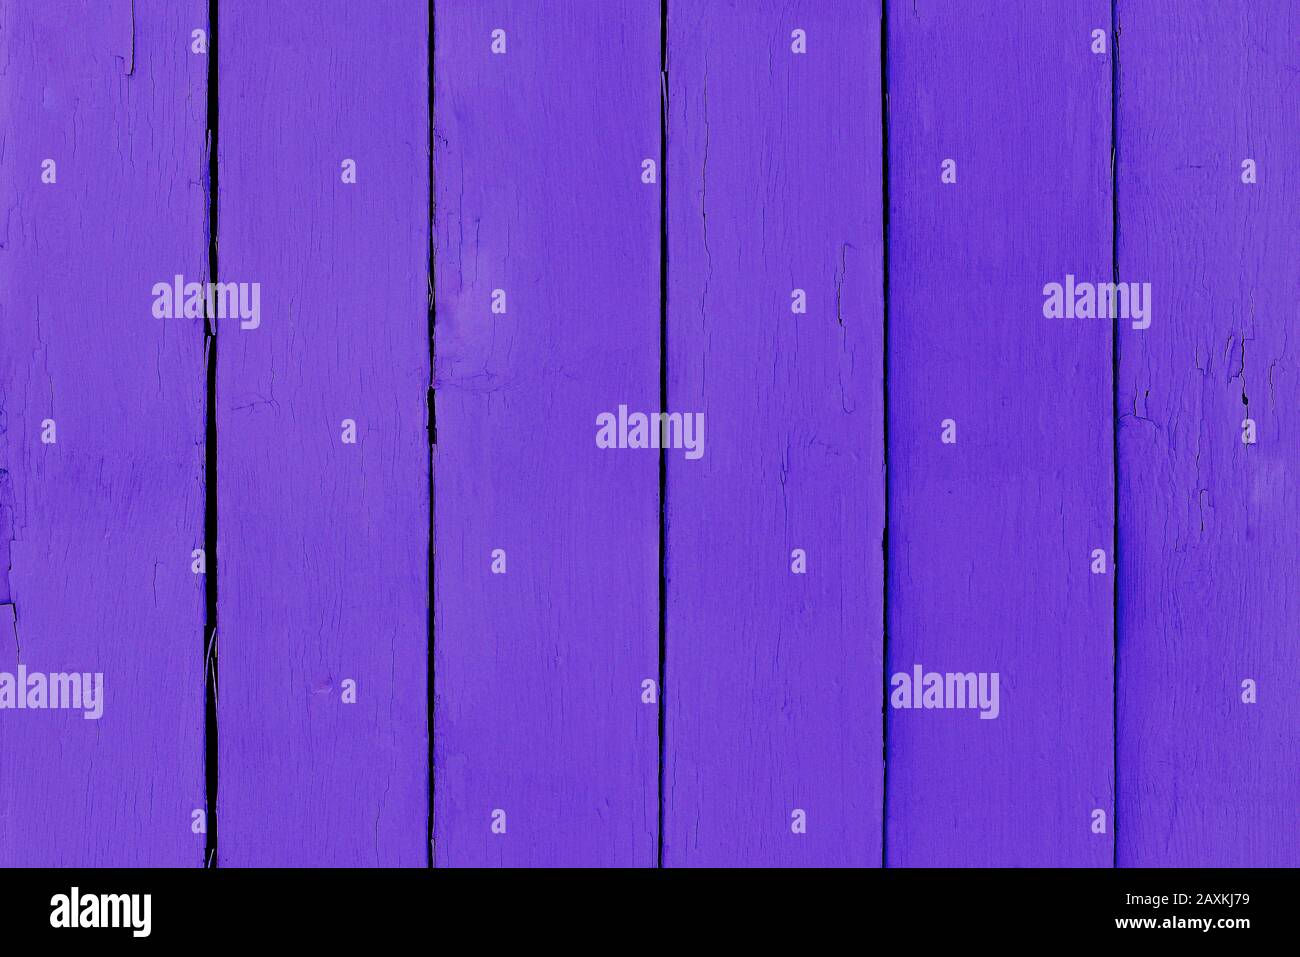 The texture of the wooden board is purple. Stock Photo